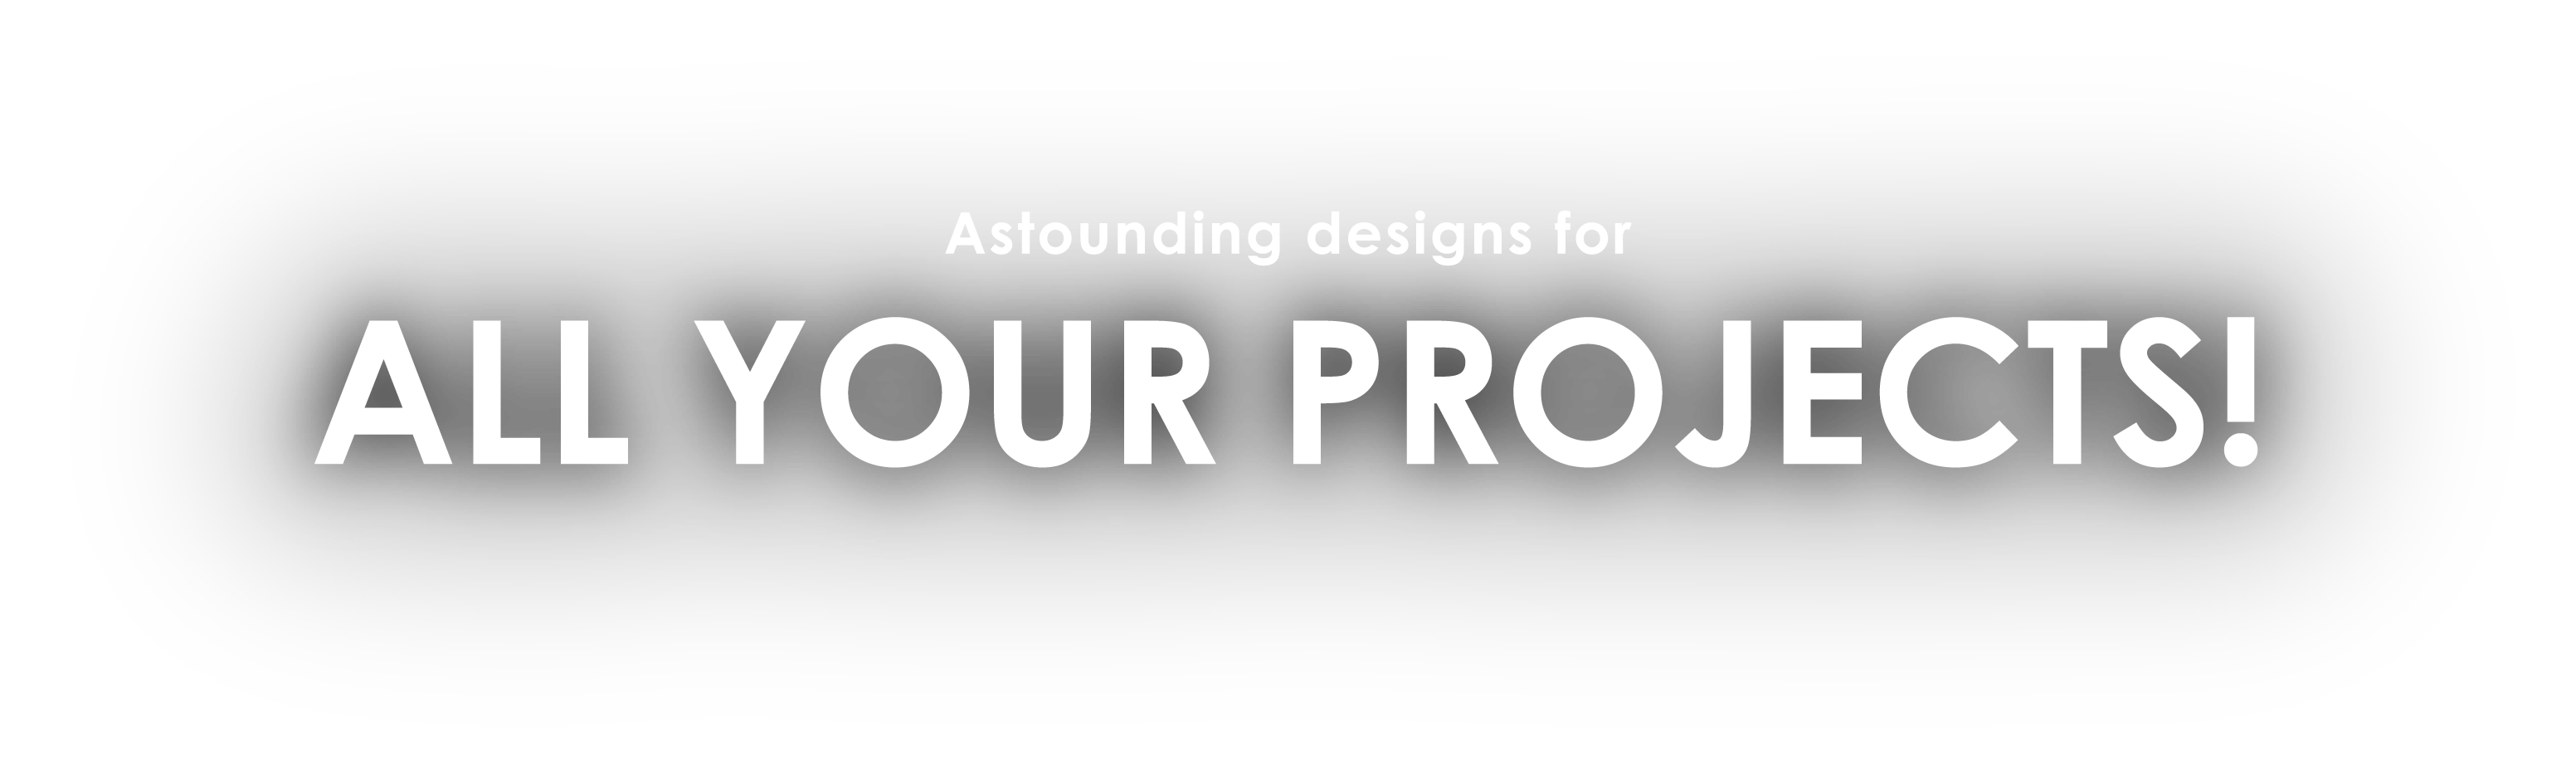 Astounding designs for ALL YOUR PROJECTS!